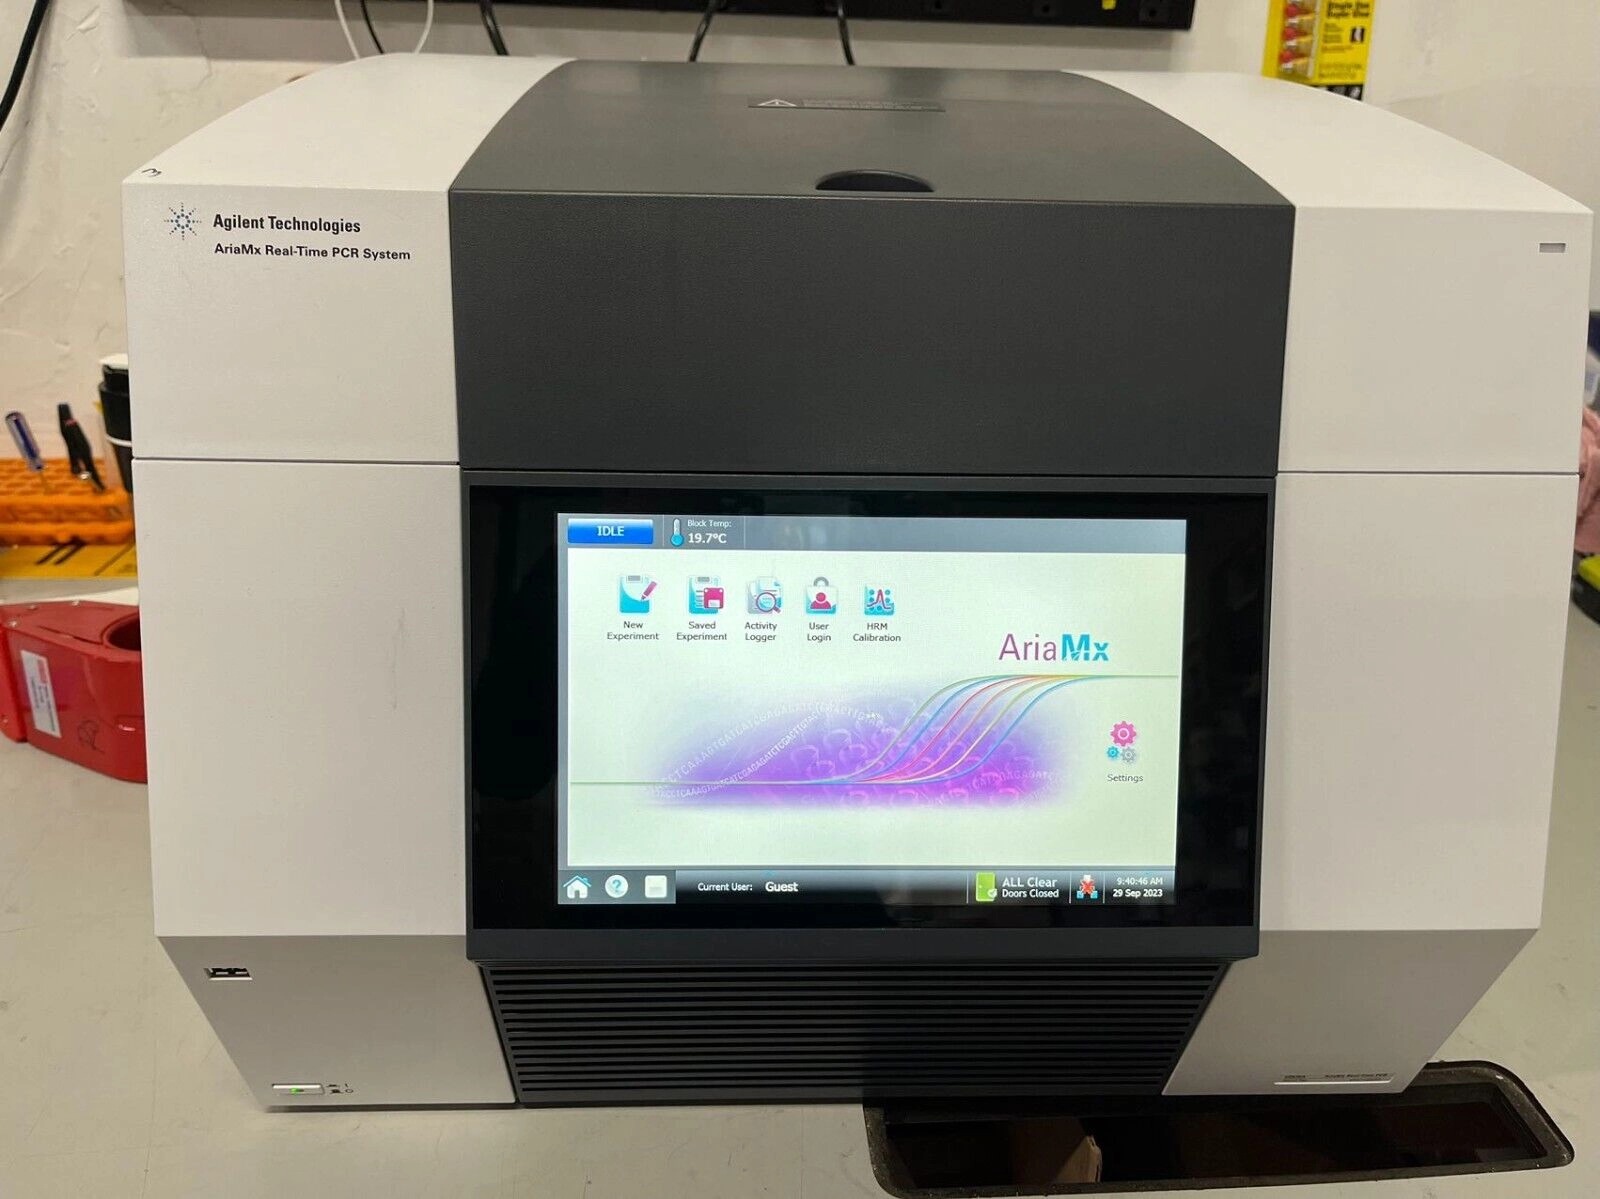 Agilent AriaMx Real-Time PCR System G8830-64001 Wo